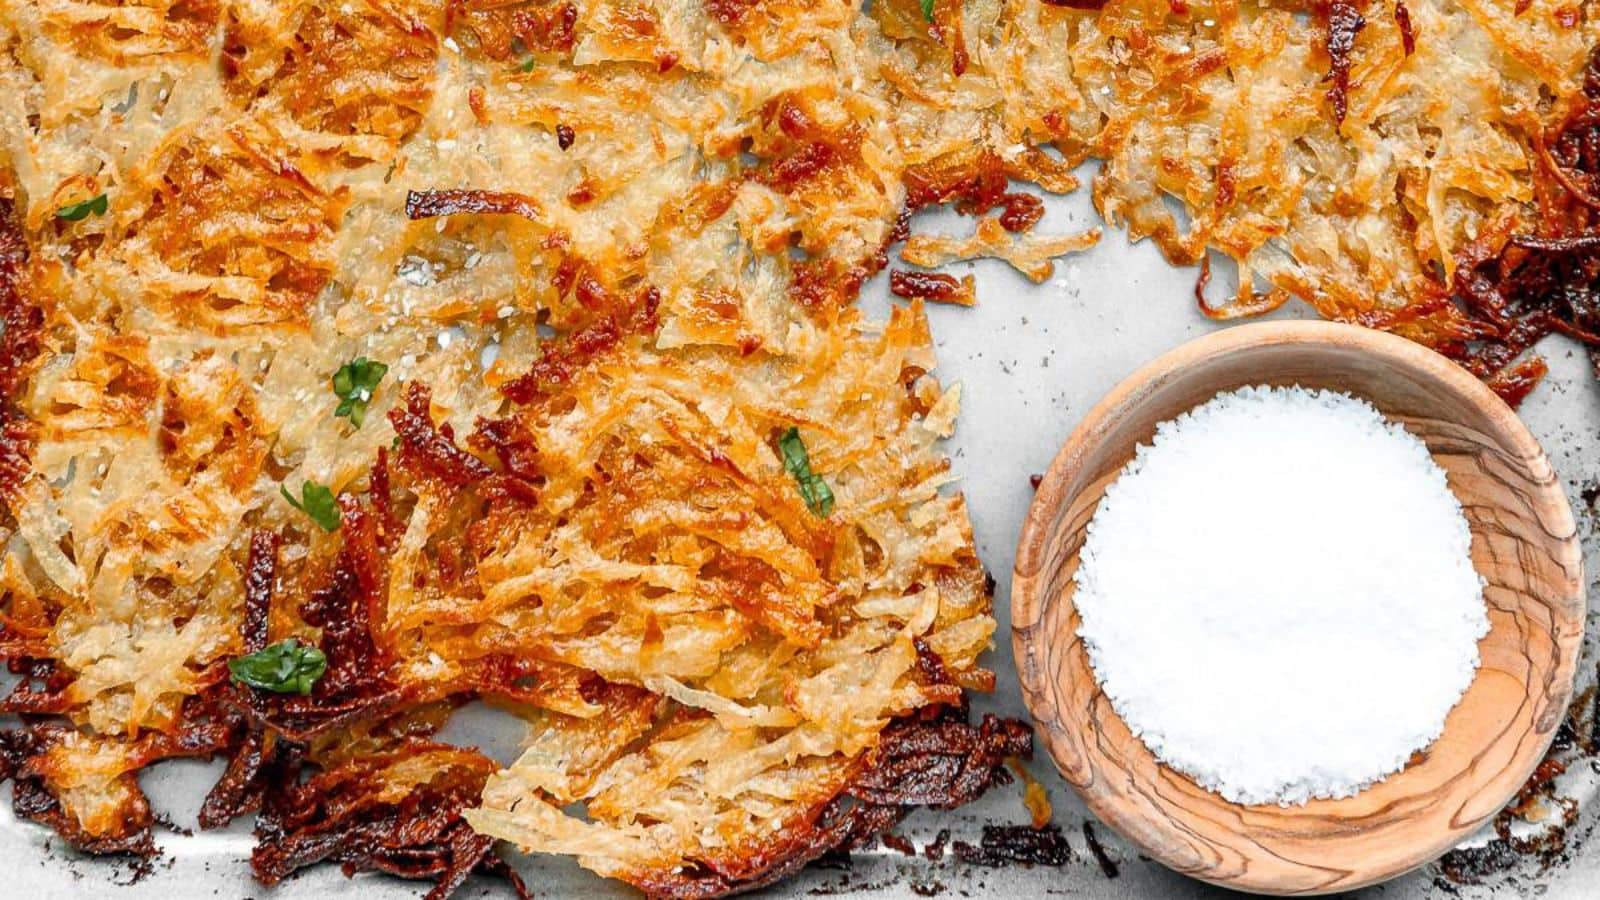 Crispy hash browns with a bowl of salt nearby.